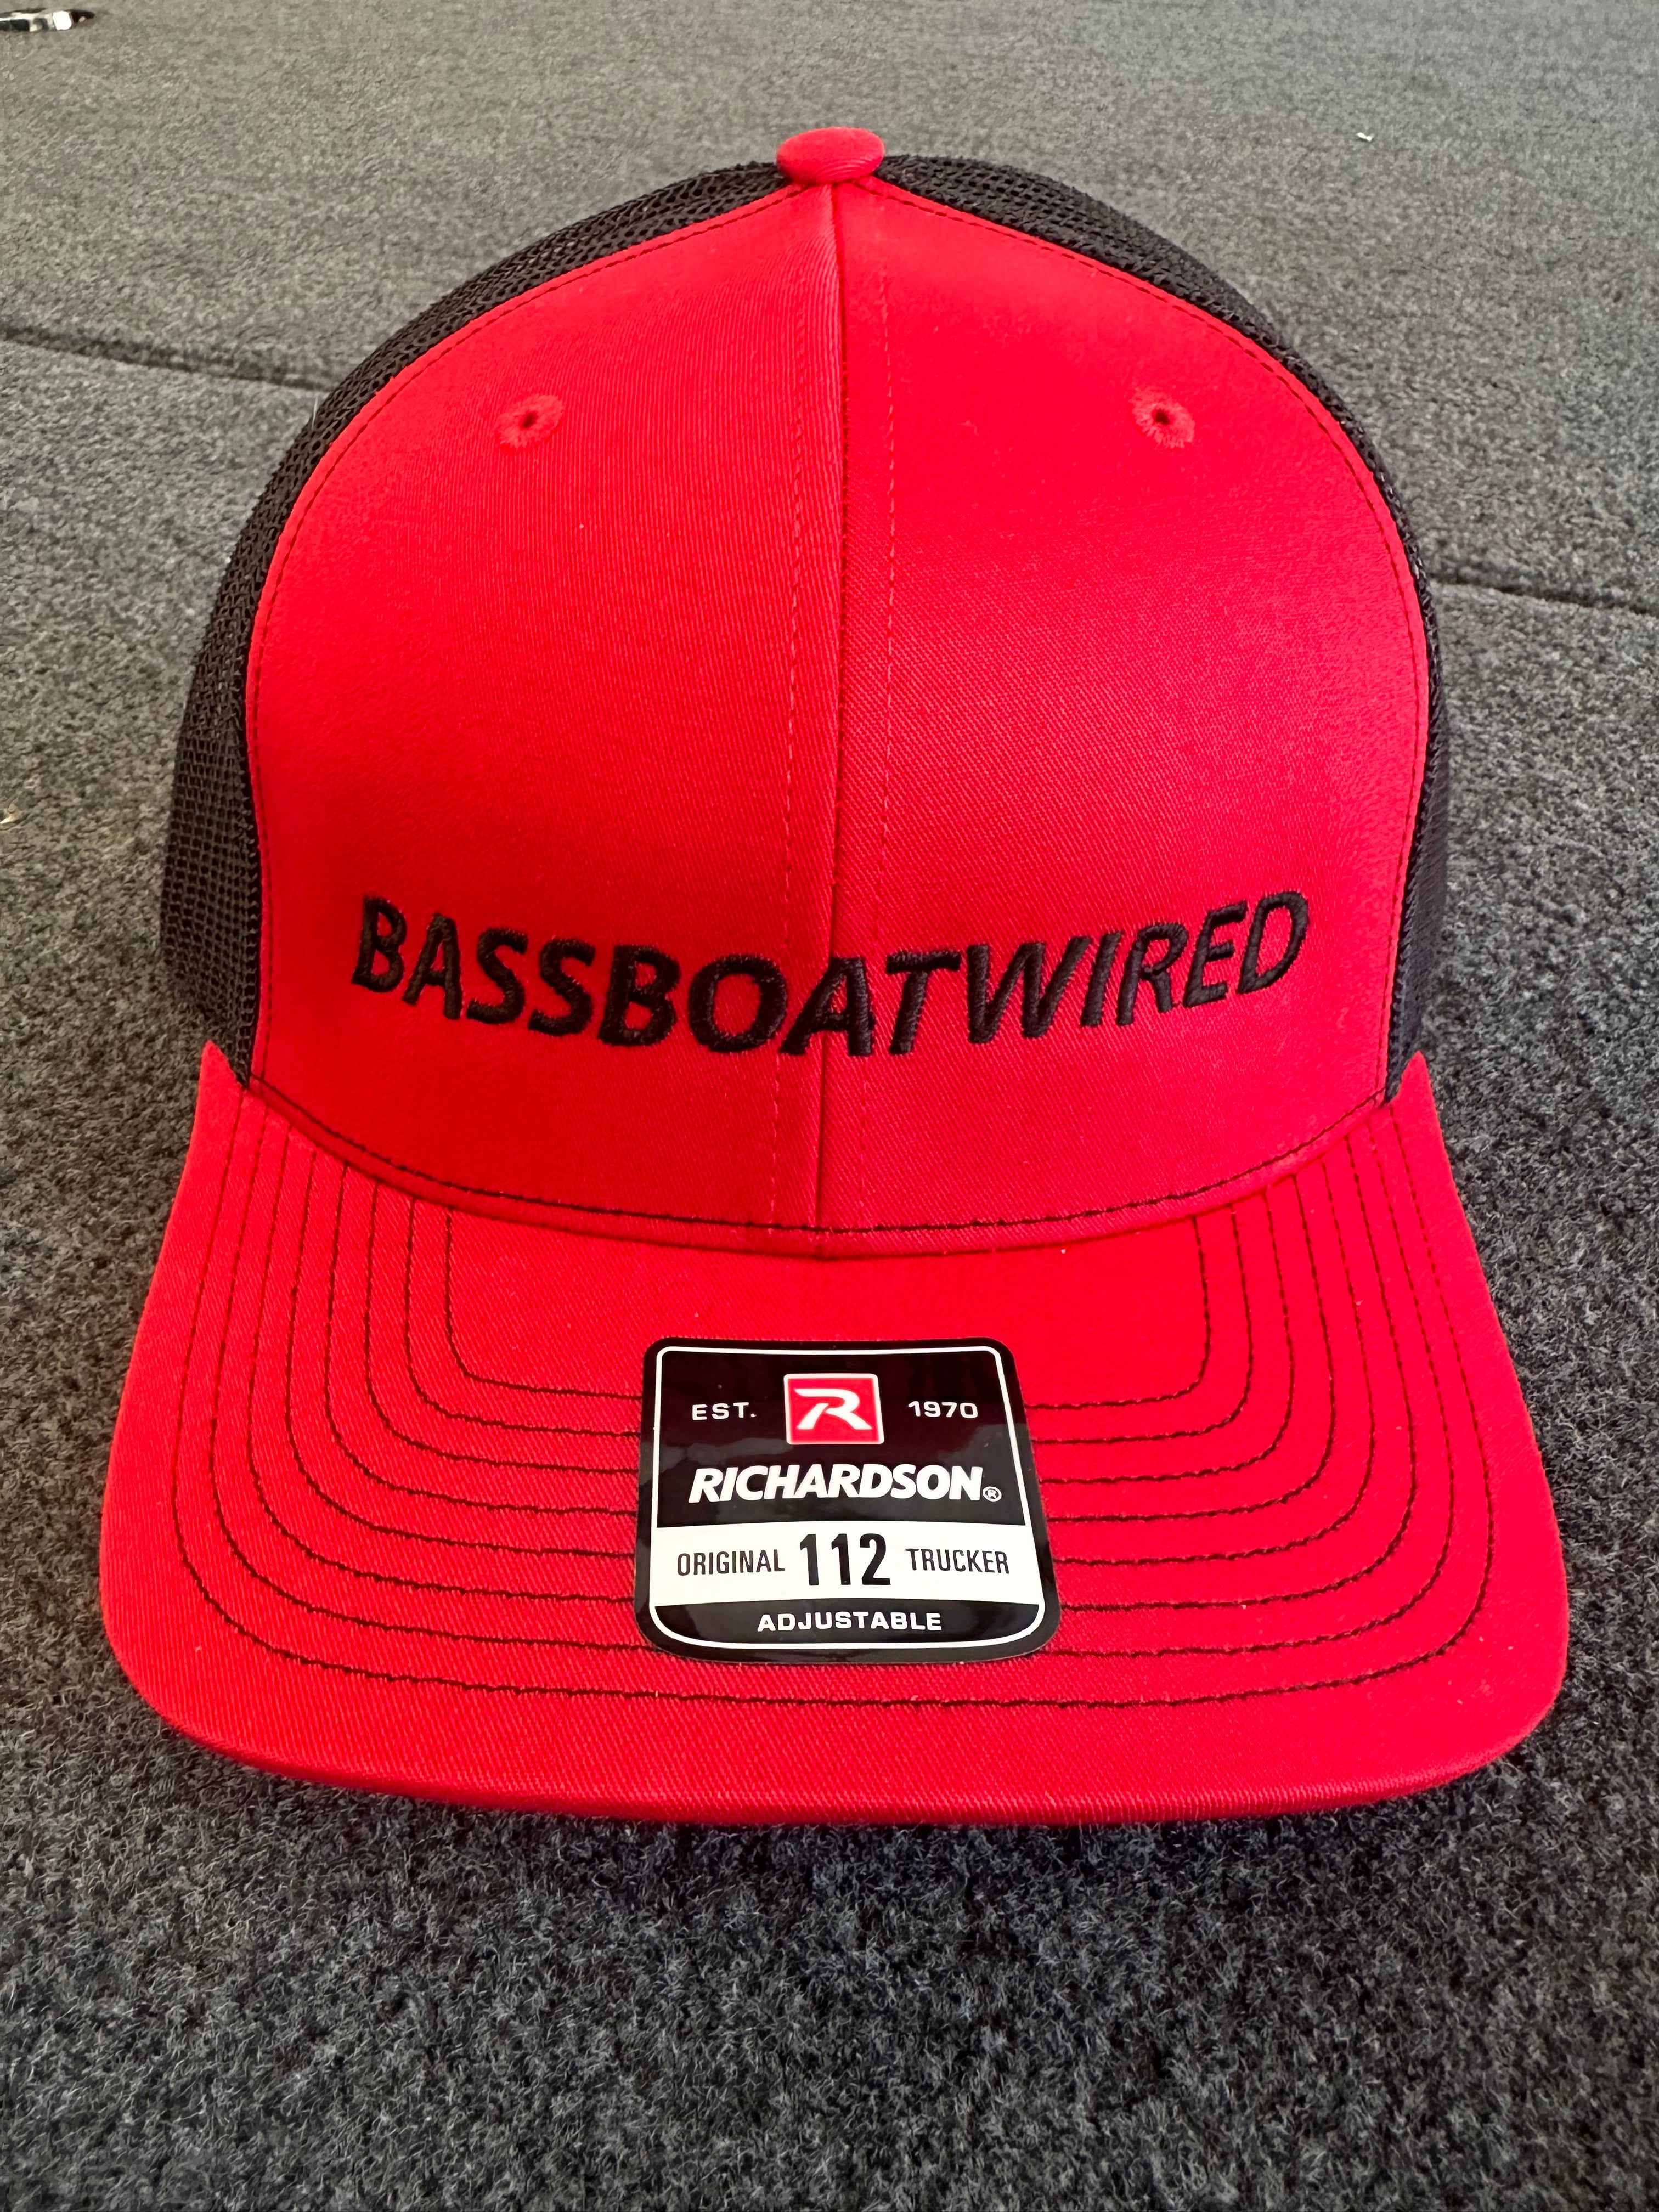 Bass Boat Wired Hats Red & Black